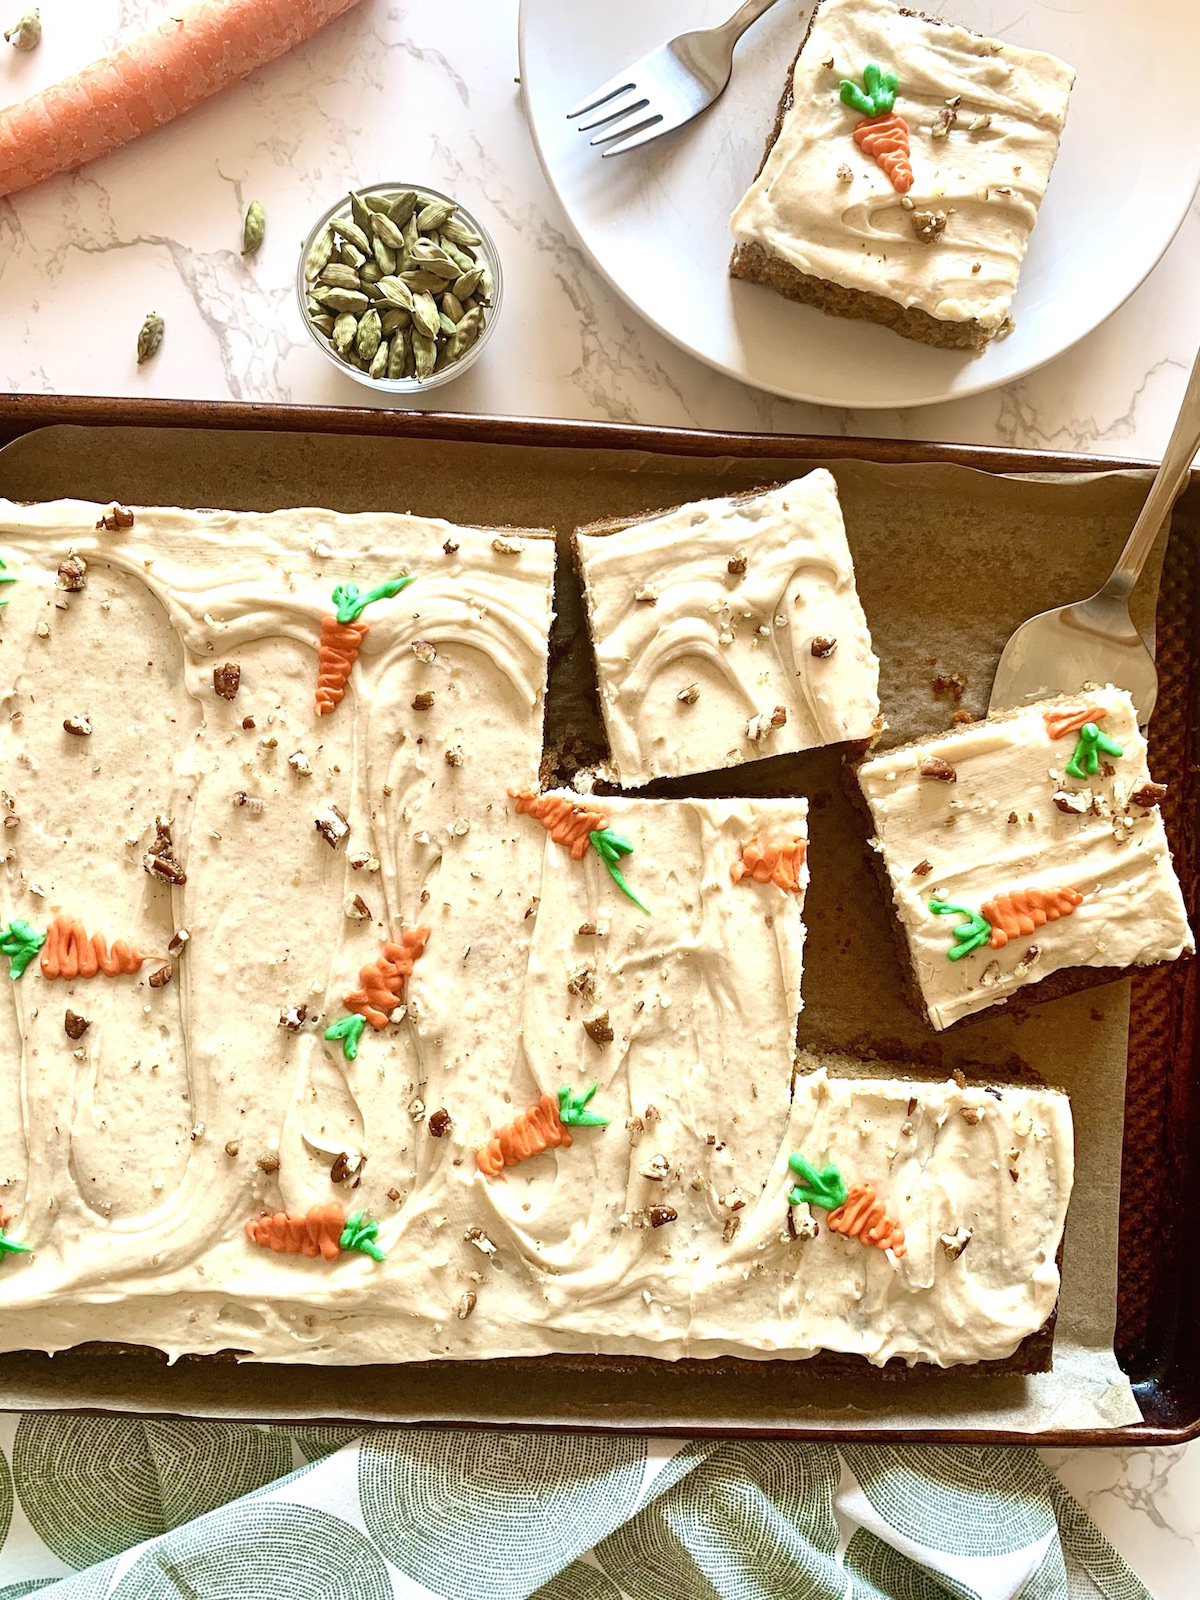 Full sheet of carrot cake sheet cake with brown butter cream cheese frosting with a few slices cut. one slice on a white plate and bowl of cardamom pods in the background